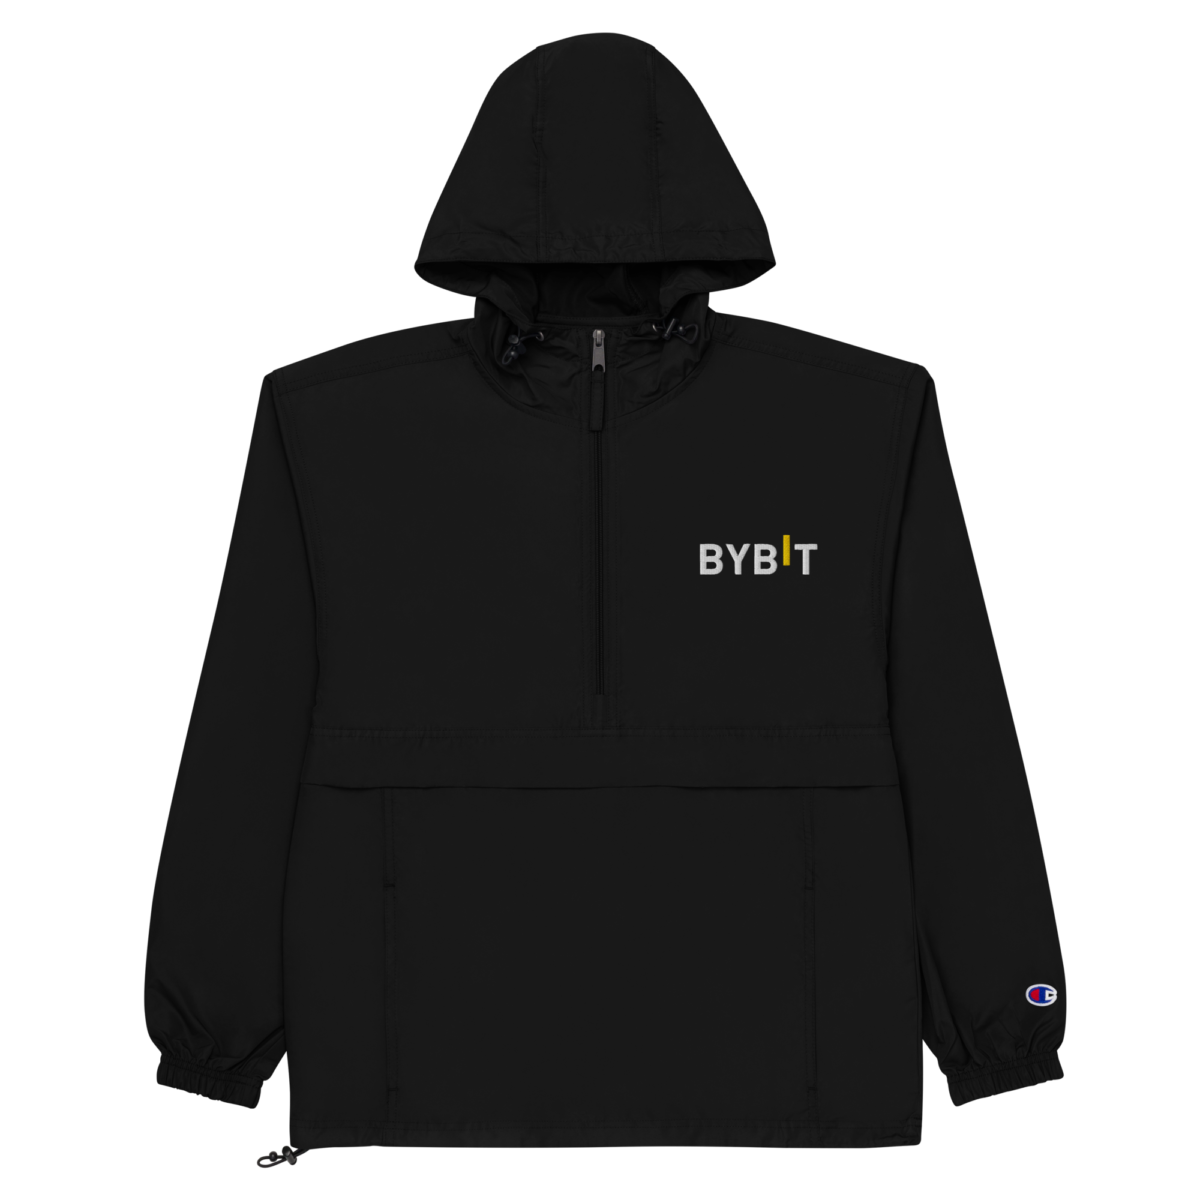 embroidered champion packable jacket black front 6321ec1f25d30 - Bybit Champion Packable Jacket